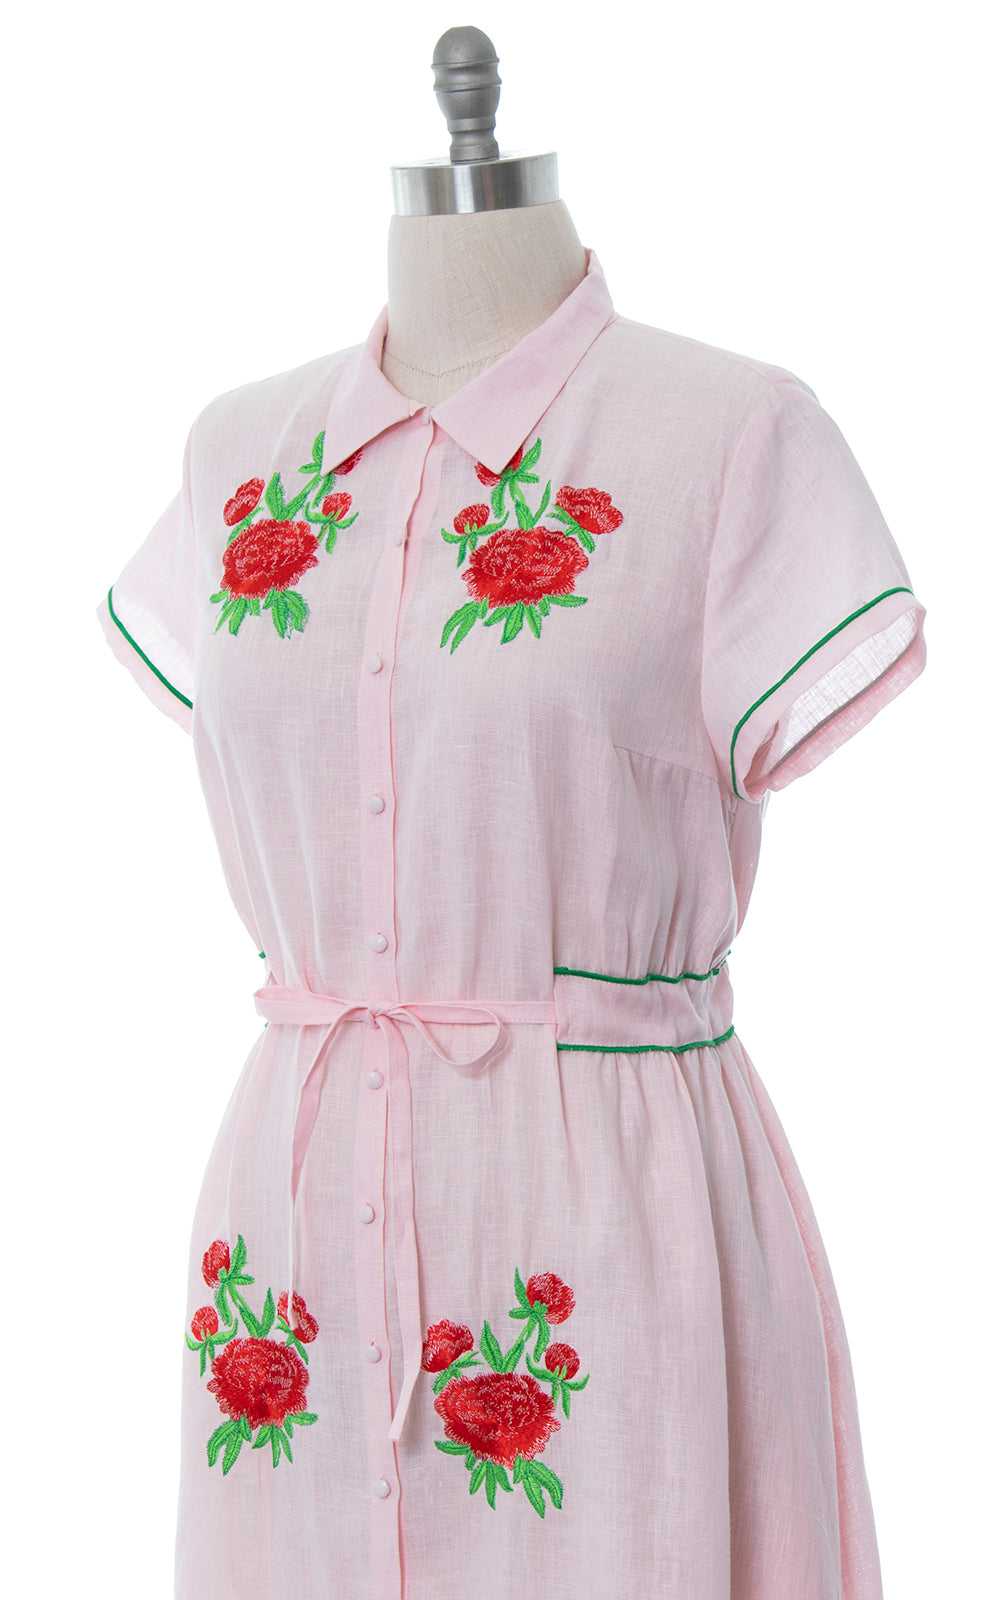 MODERN 1950s Style Embroidered Linen Dress | larg… - image 2